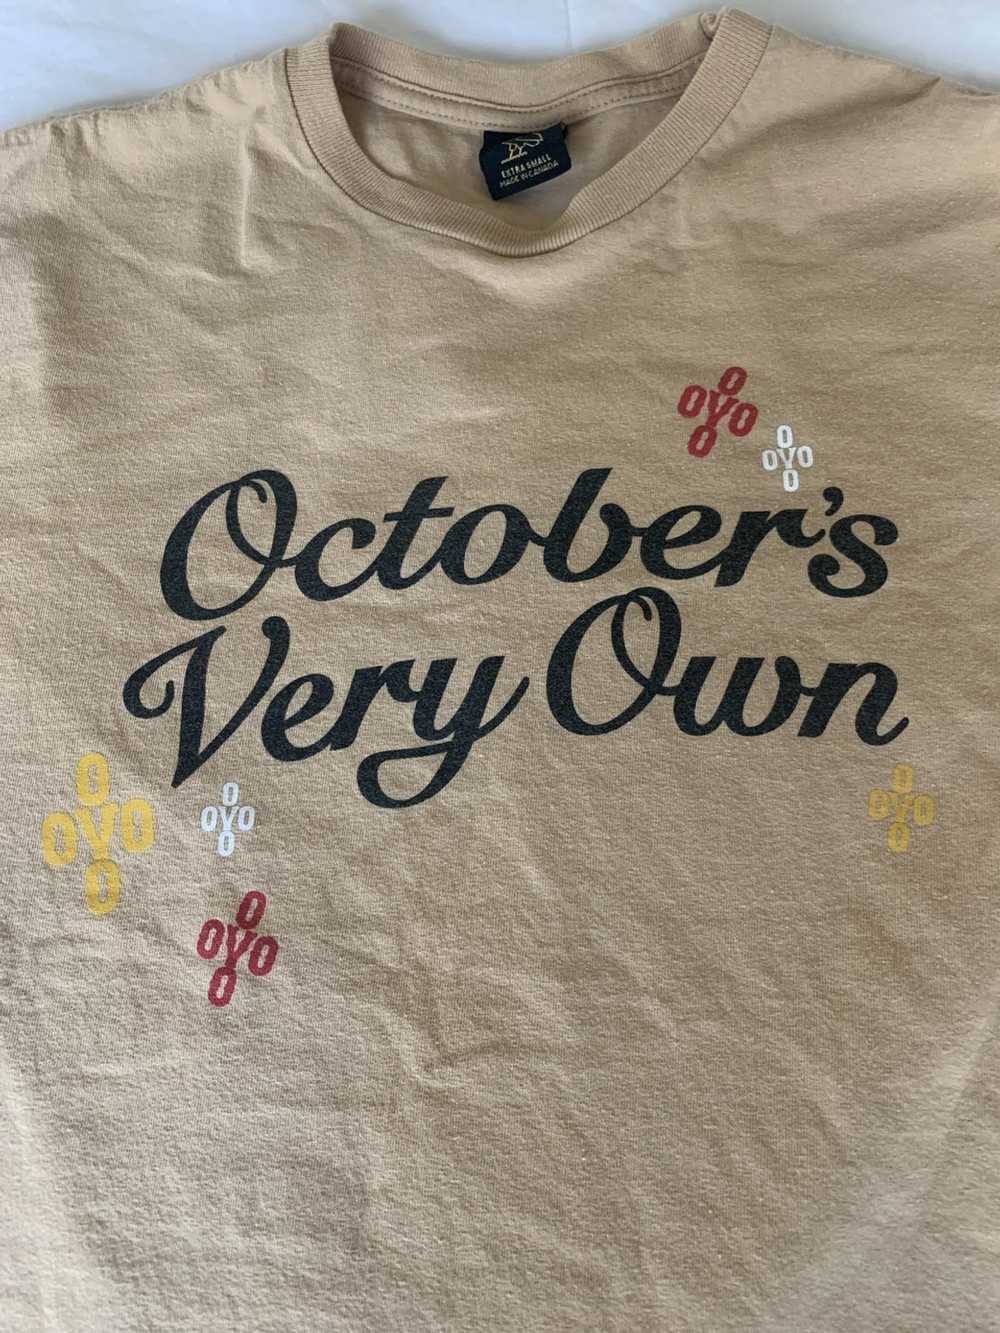 Octobers Very Own October’s Very Own Design Tee - image 3